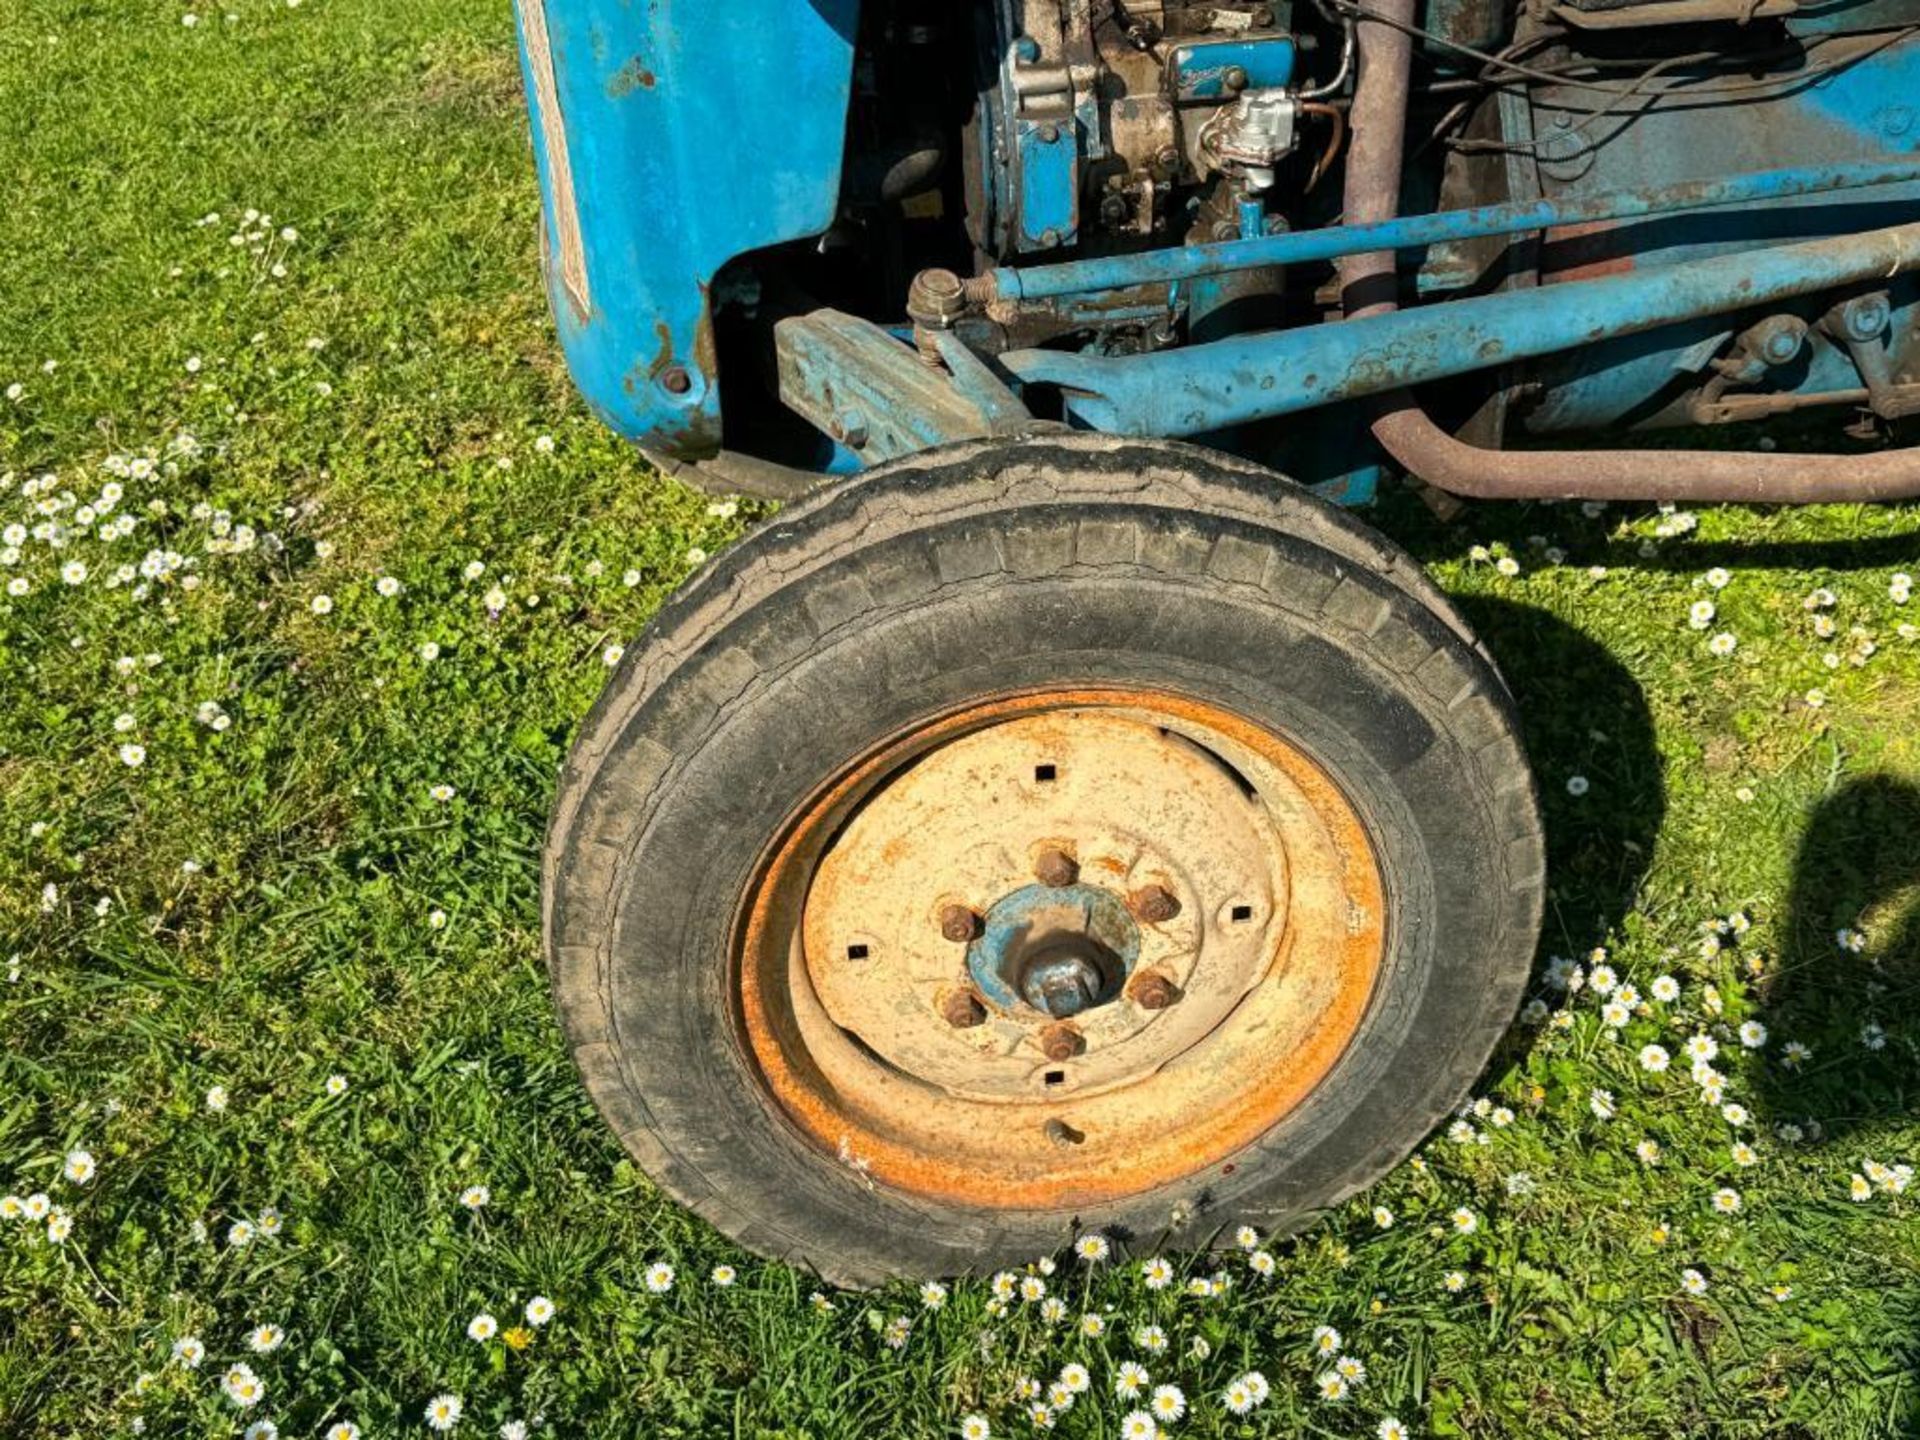 Fordson Super Dexta 2wd diesel tractor with rear linkage, PTO and underslung exhaust on 12.4-28 rear - Image 14 of 16